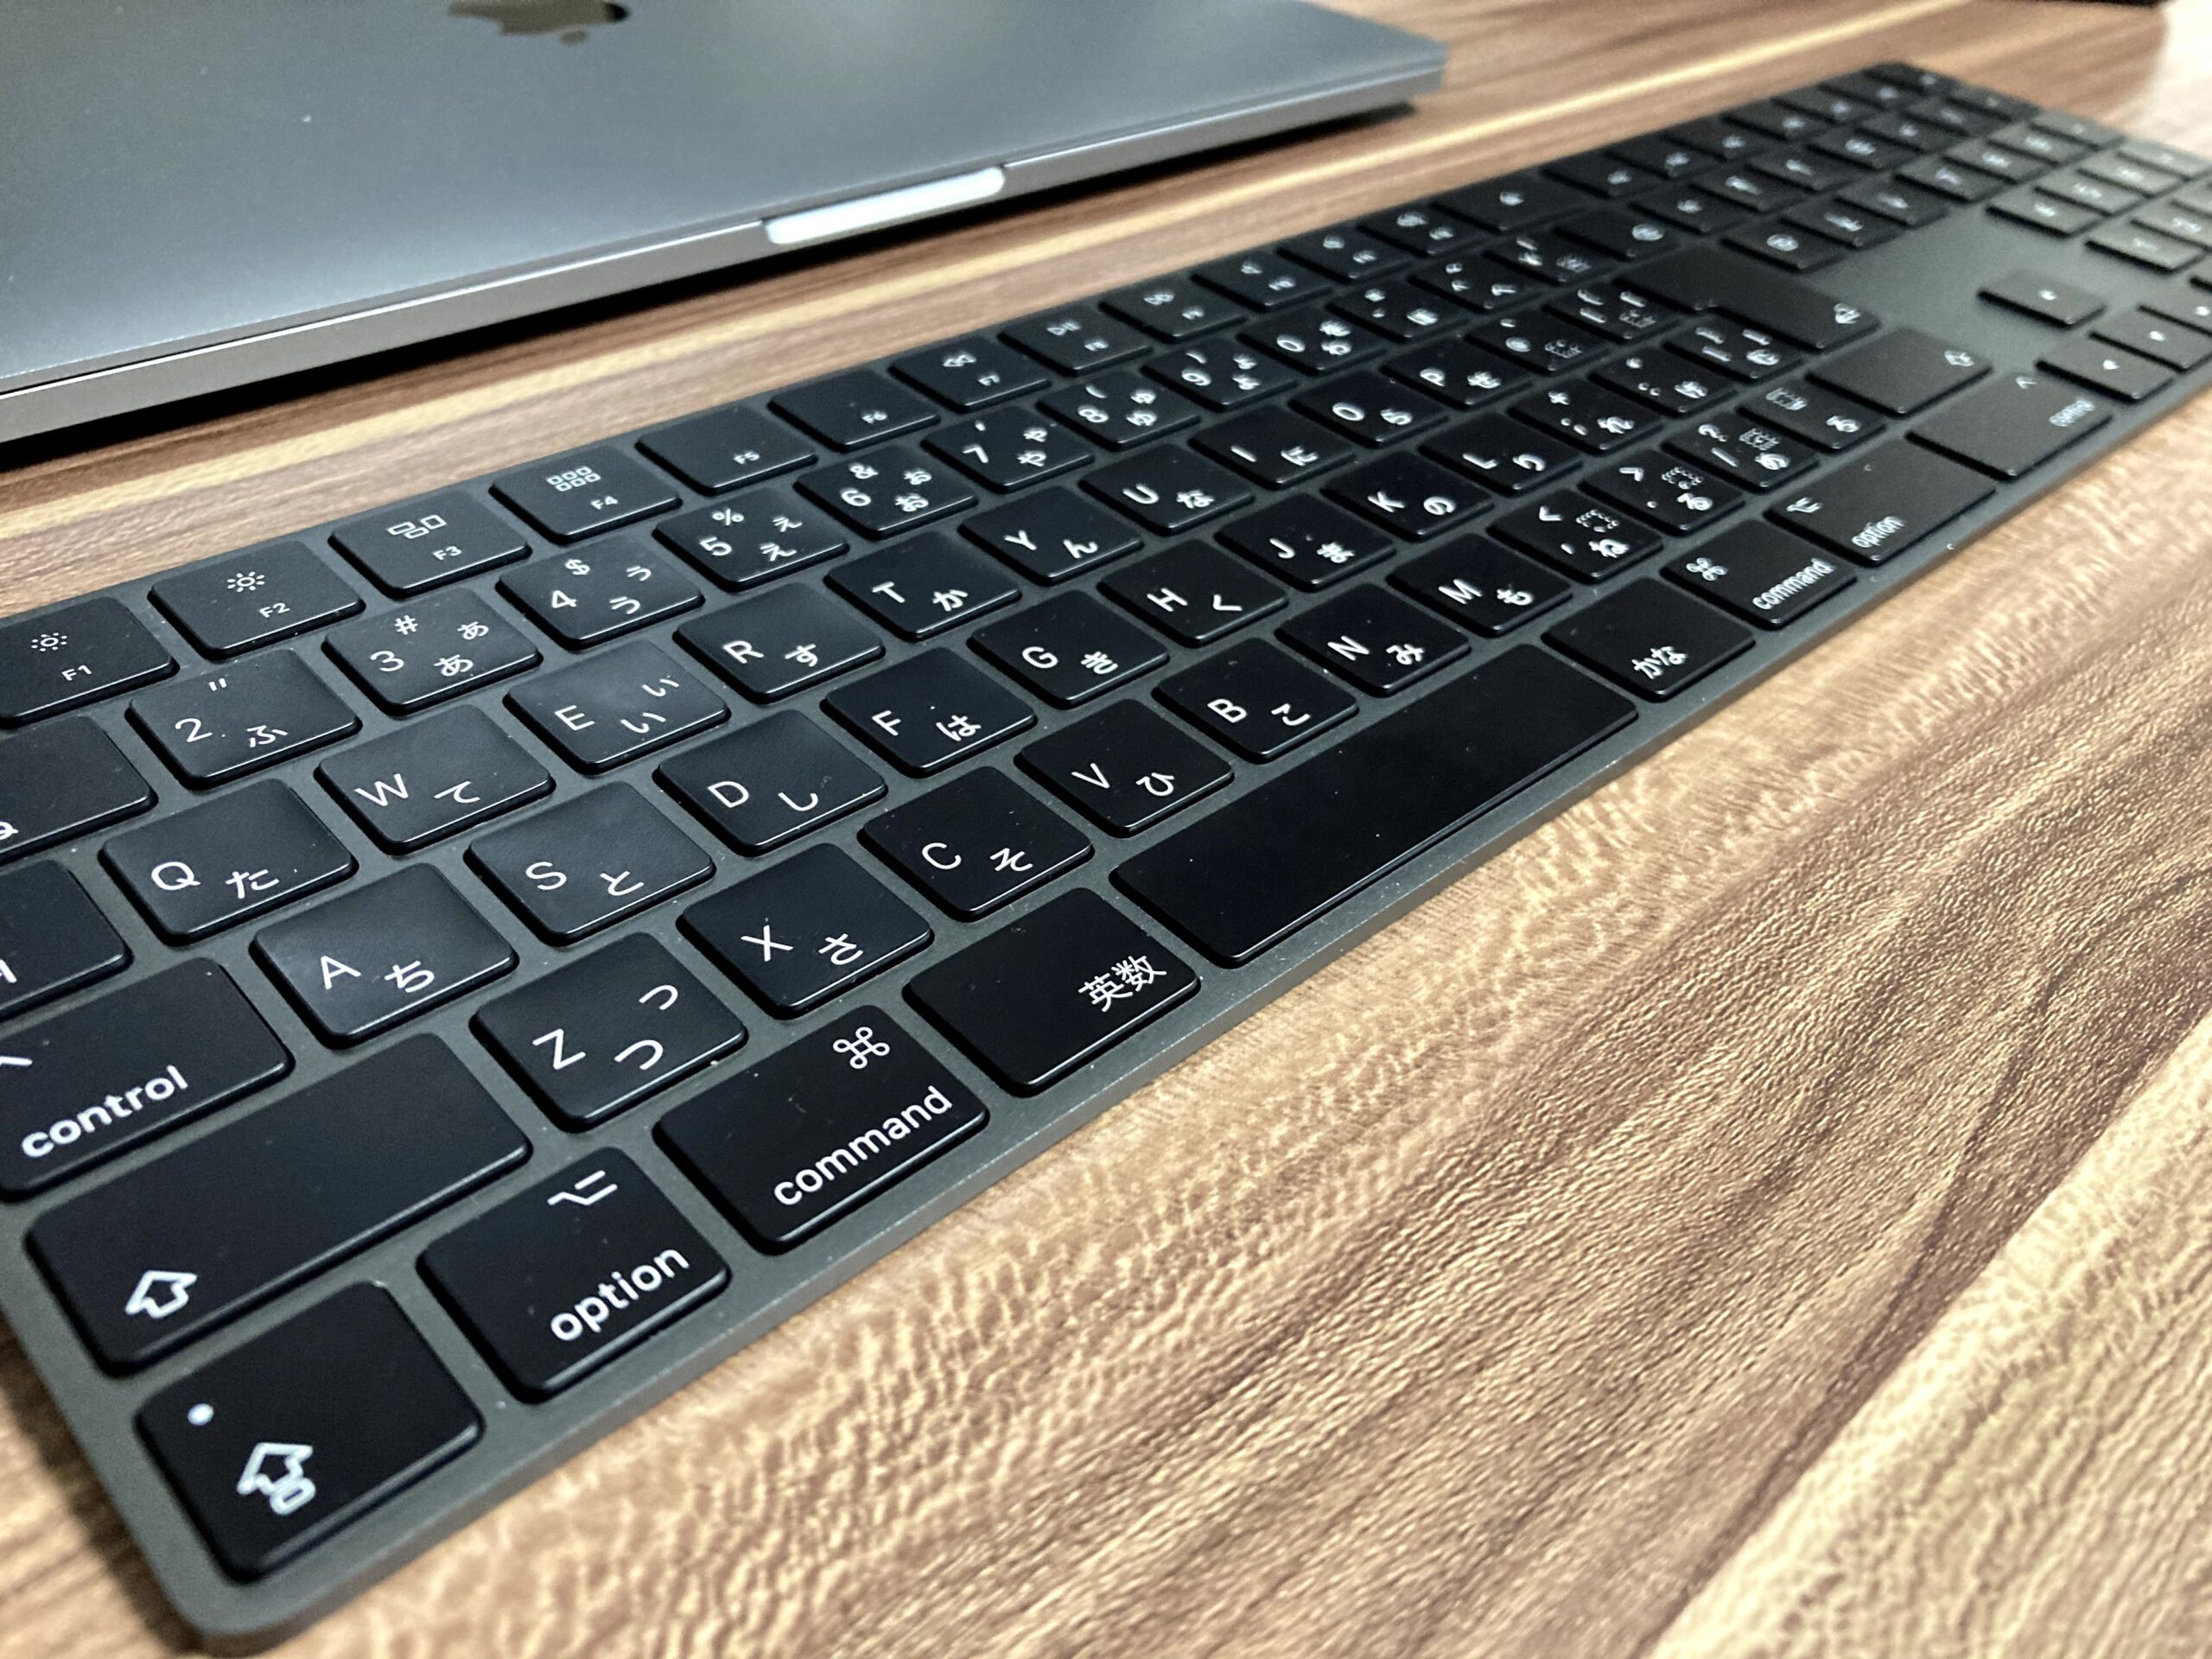 No need for Macbook users】Magic Keyboard with numeric keypad